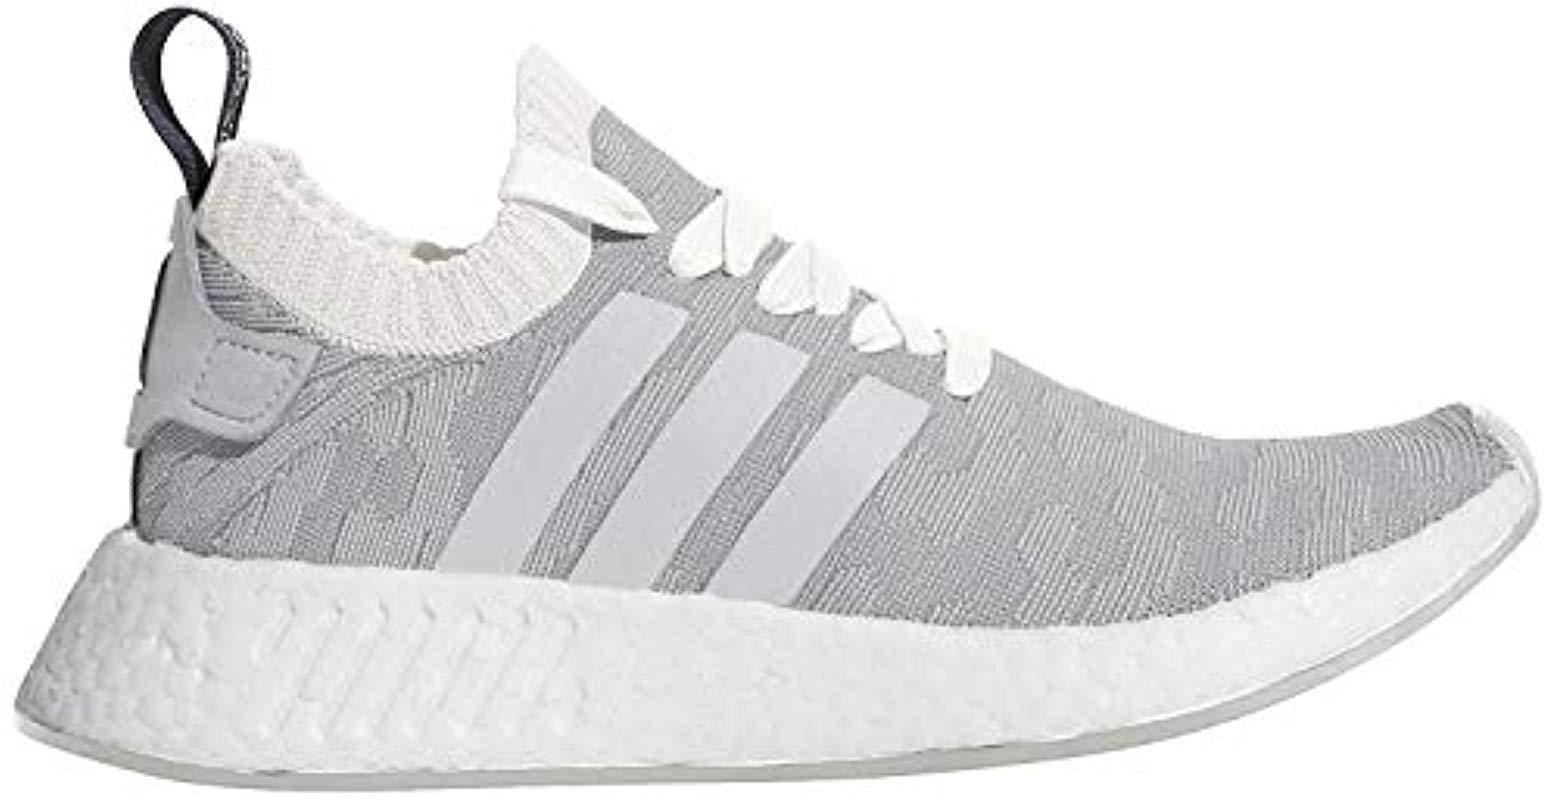 adidas Originals Synthetic Nmd_r2 Pk W Running Shoe in White/White/Black  (White) - Save 51% - Lyst